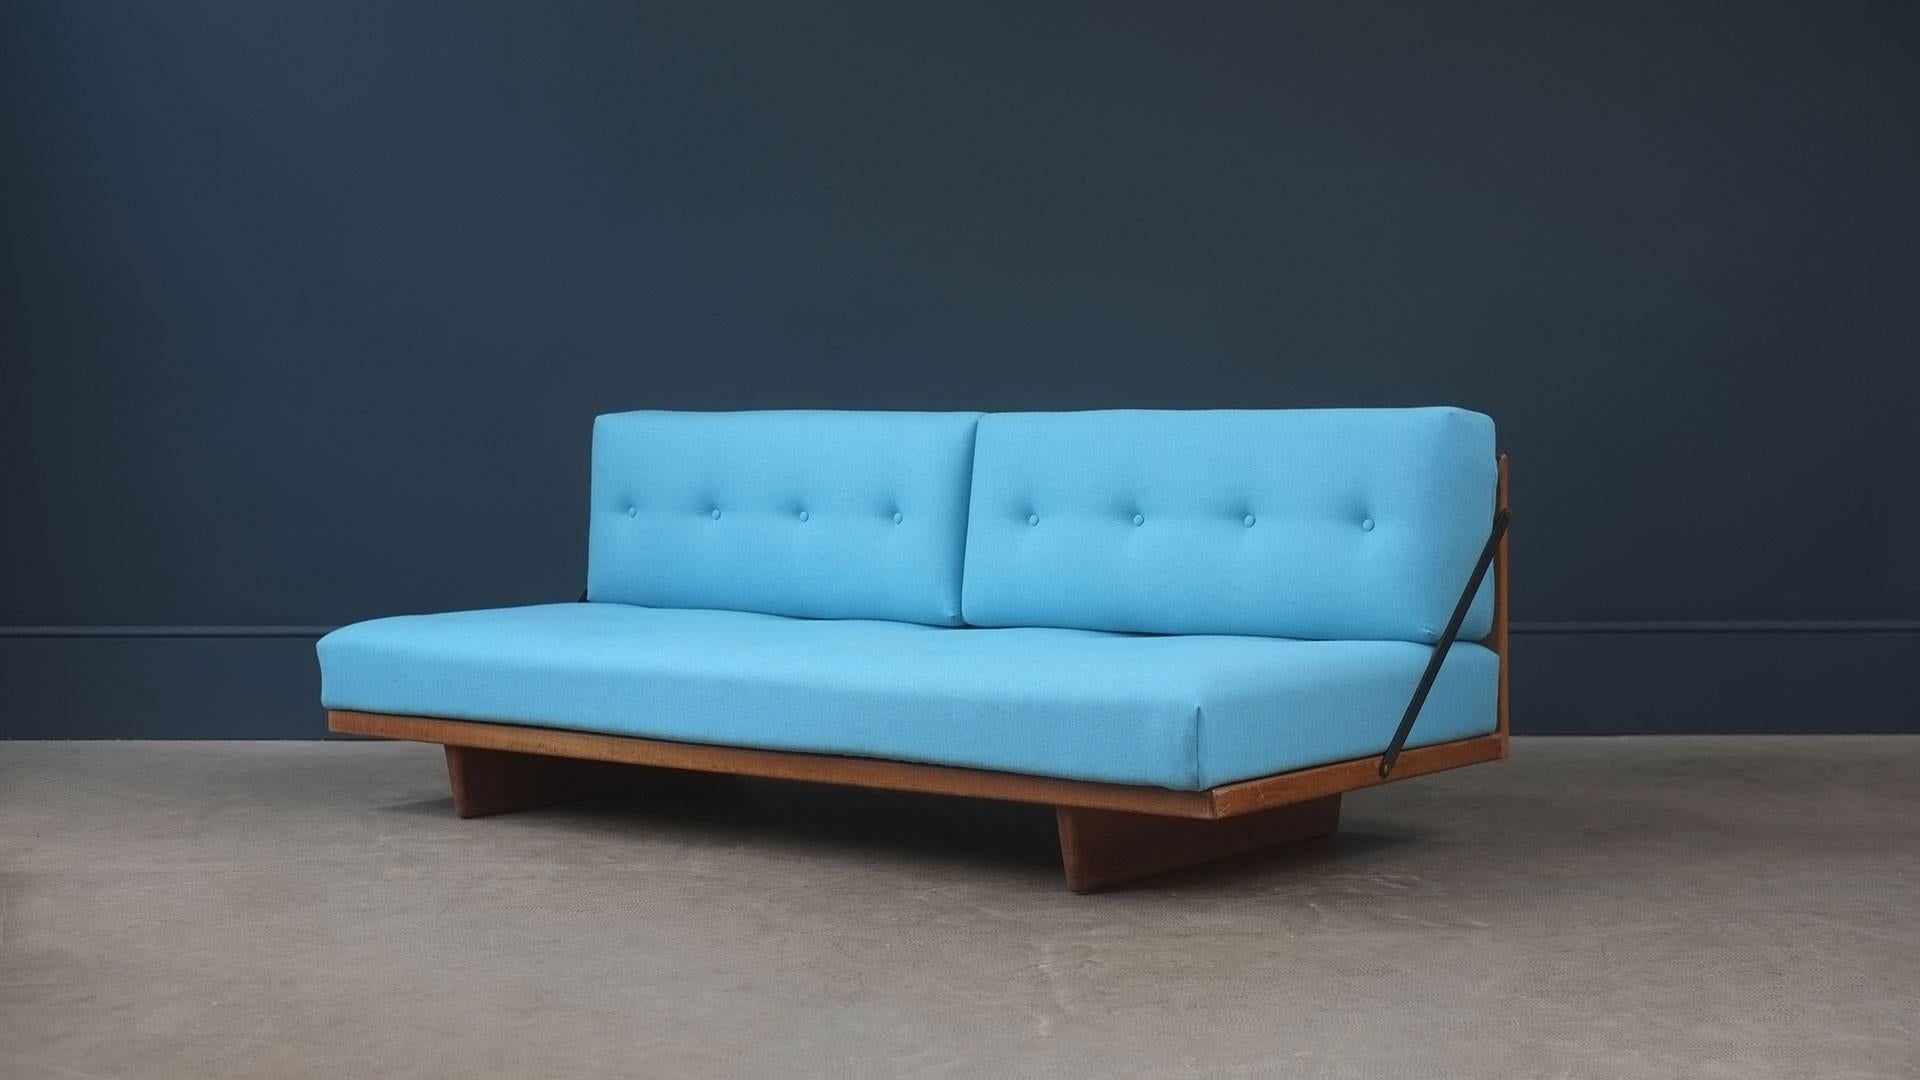 Rare and beautiful daybed in solid oak with refurbished and reupholstered original fully sprung cushions designed by Borge Mogensen for Fredericia, Denmark. Seldom seen wonderful piece of Danish design.